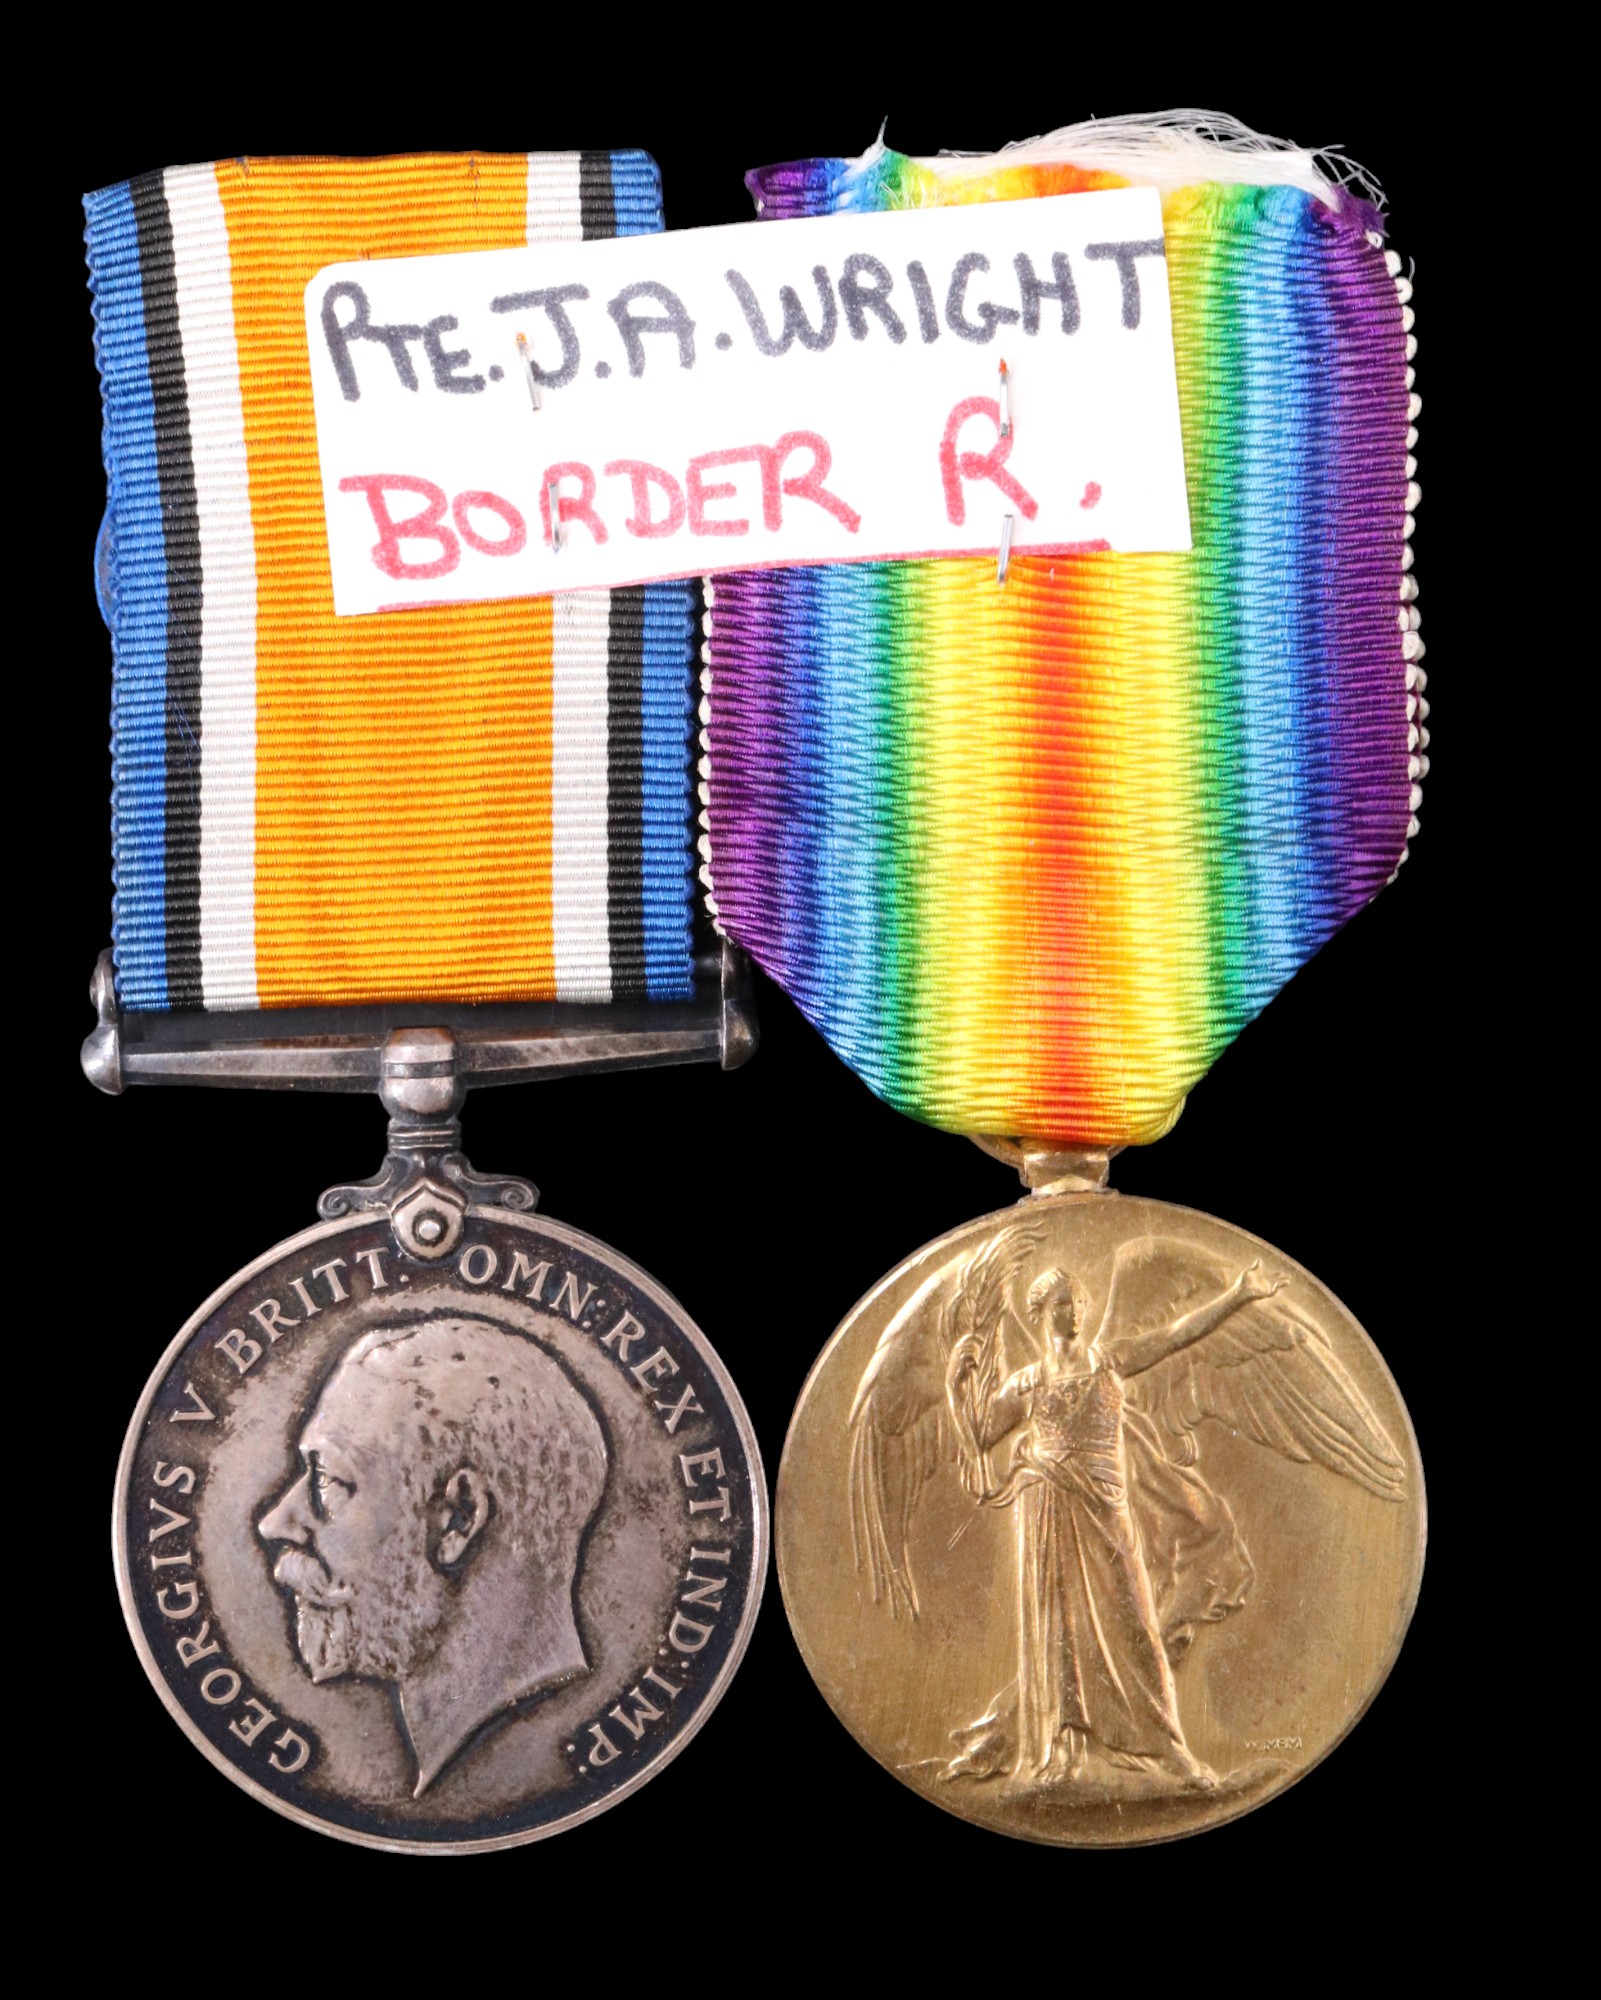 British War and Victory Medals to 35911 Pte J A Wright, Border Regiment